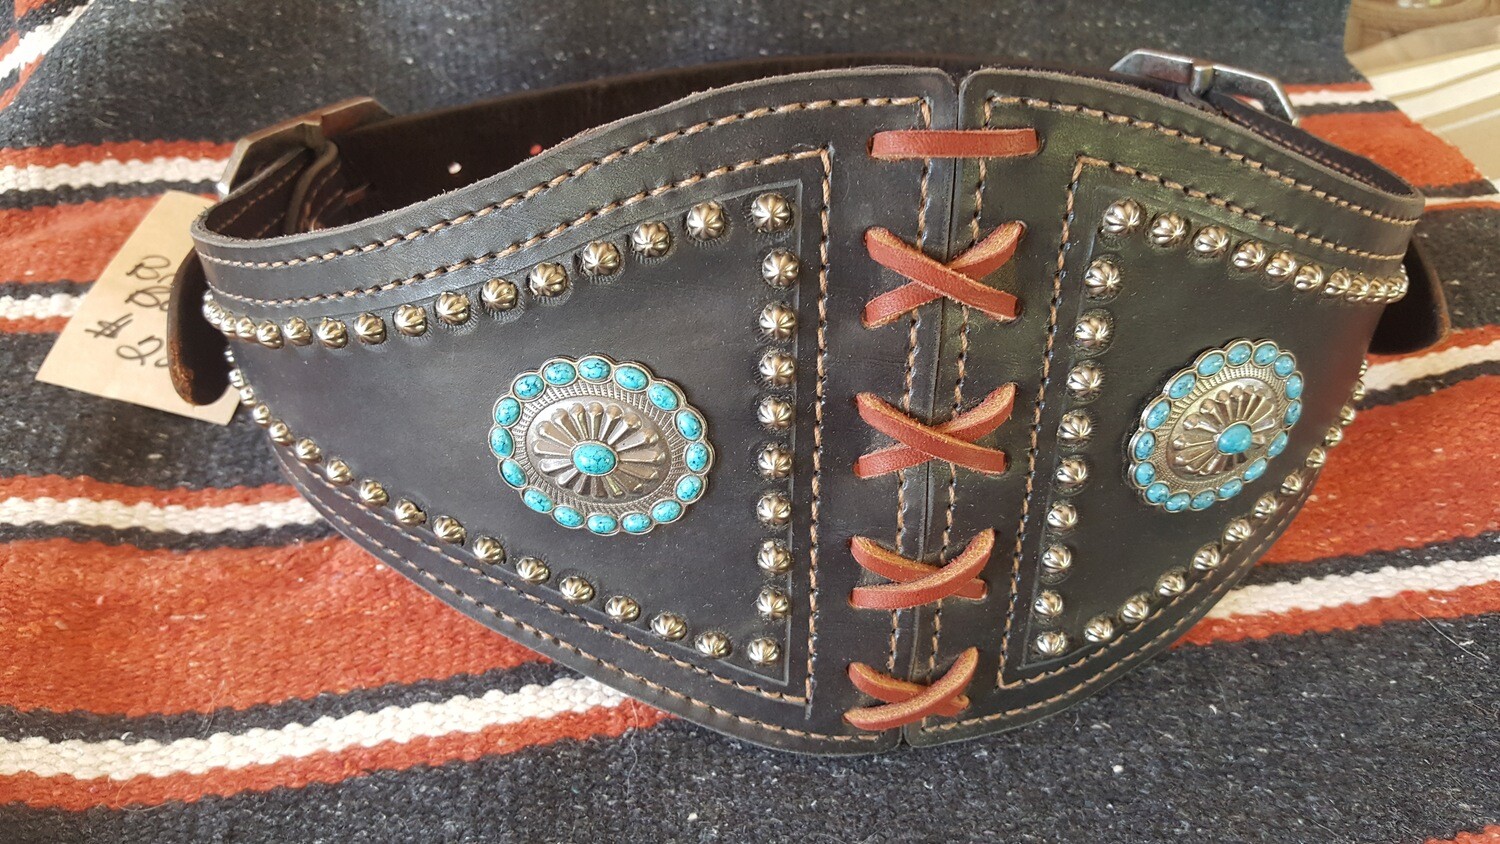 Ladies' Black Leather Bronco Belt with Conchos and Spots